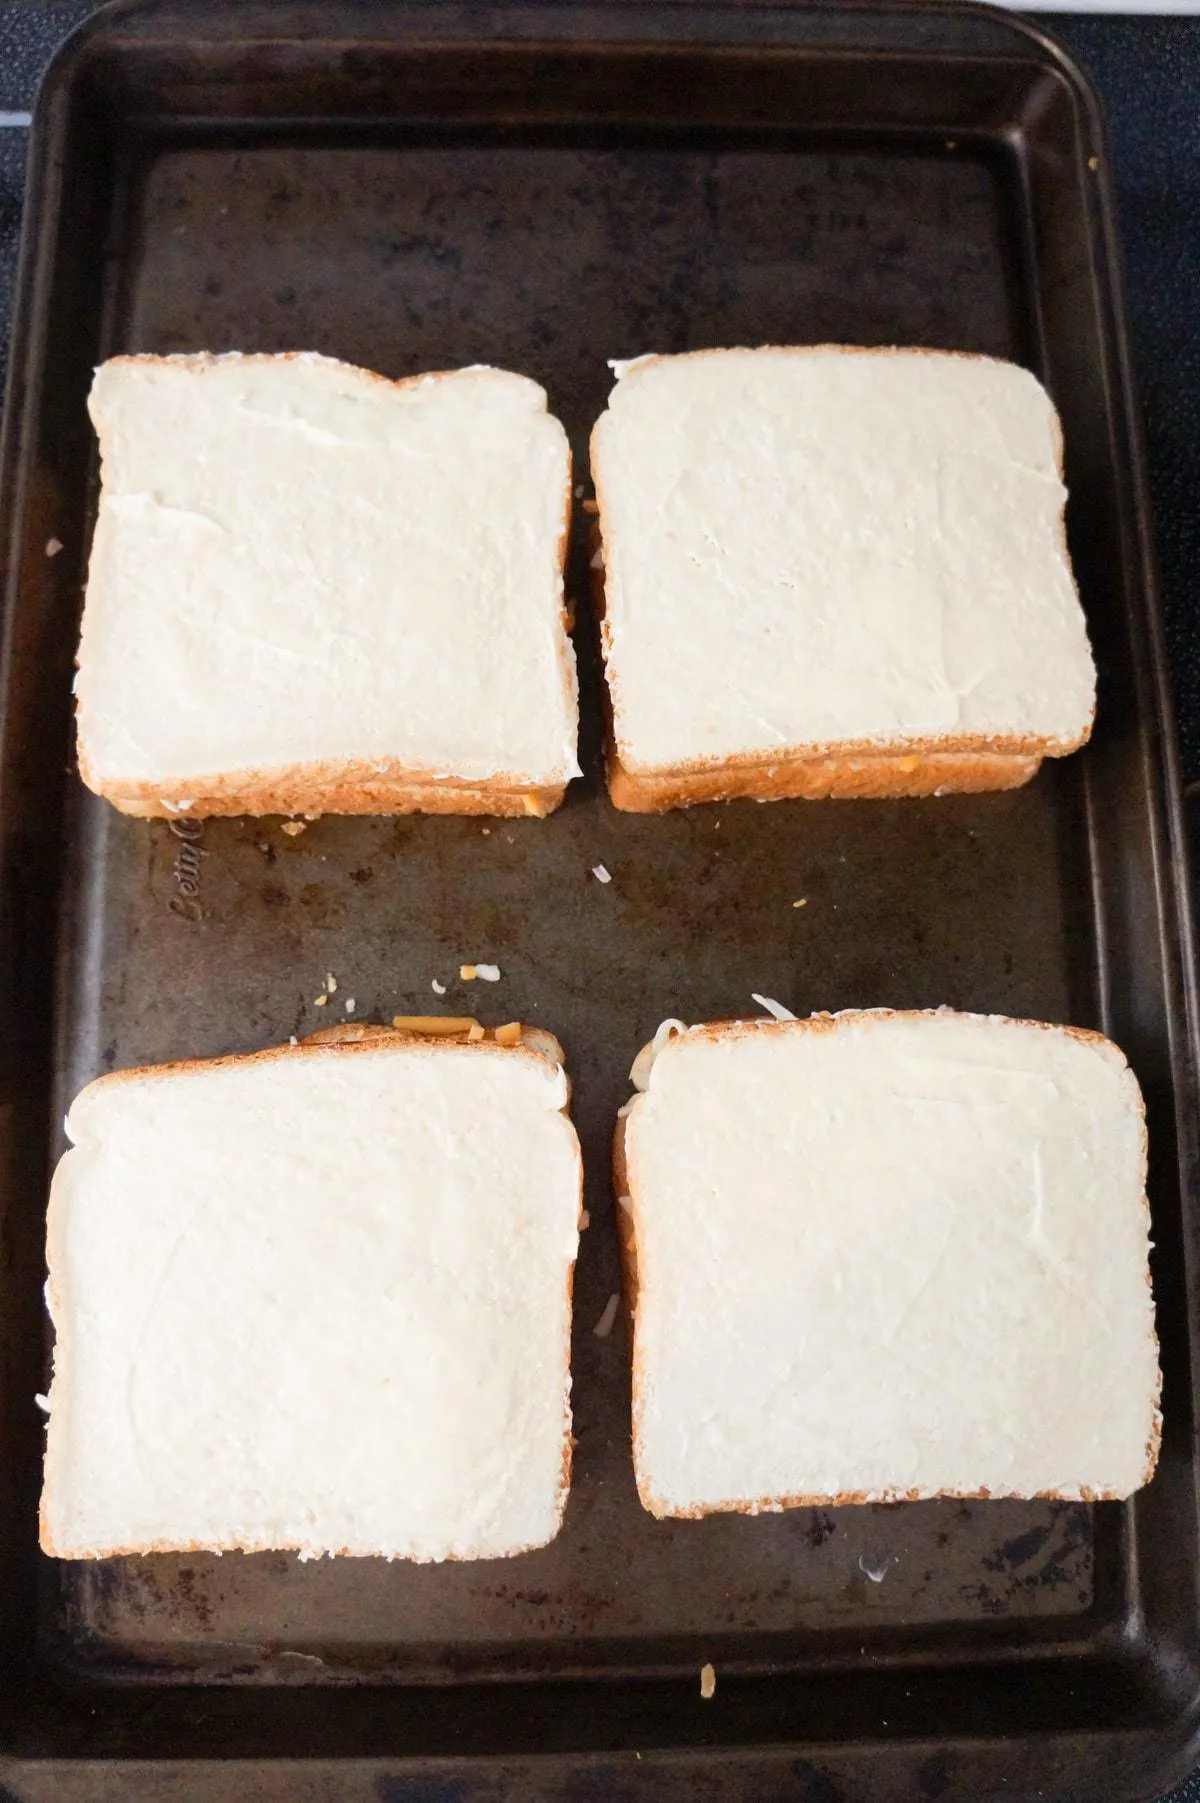 uncooked grilled cheese sandwiches on a baking sheet